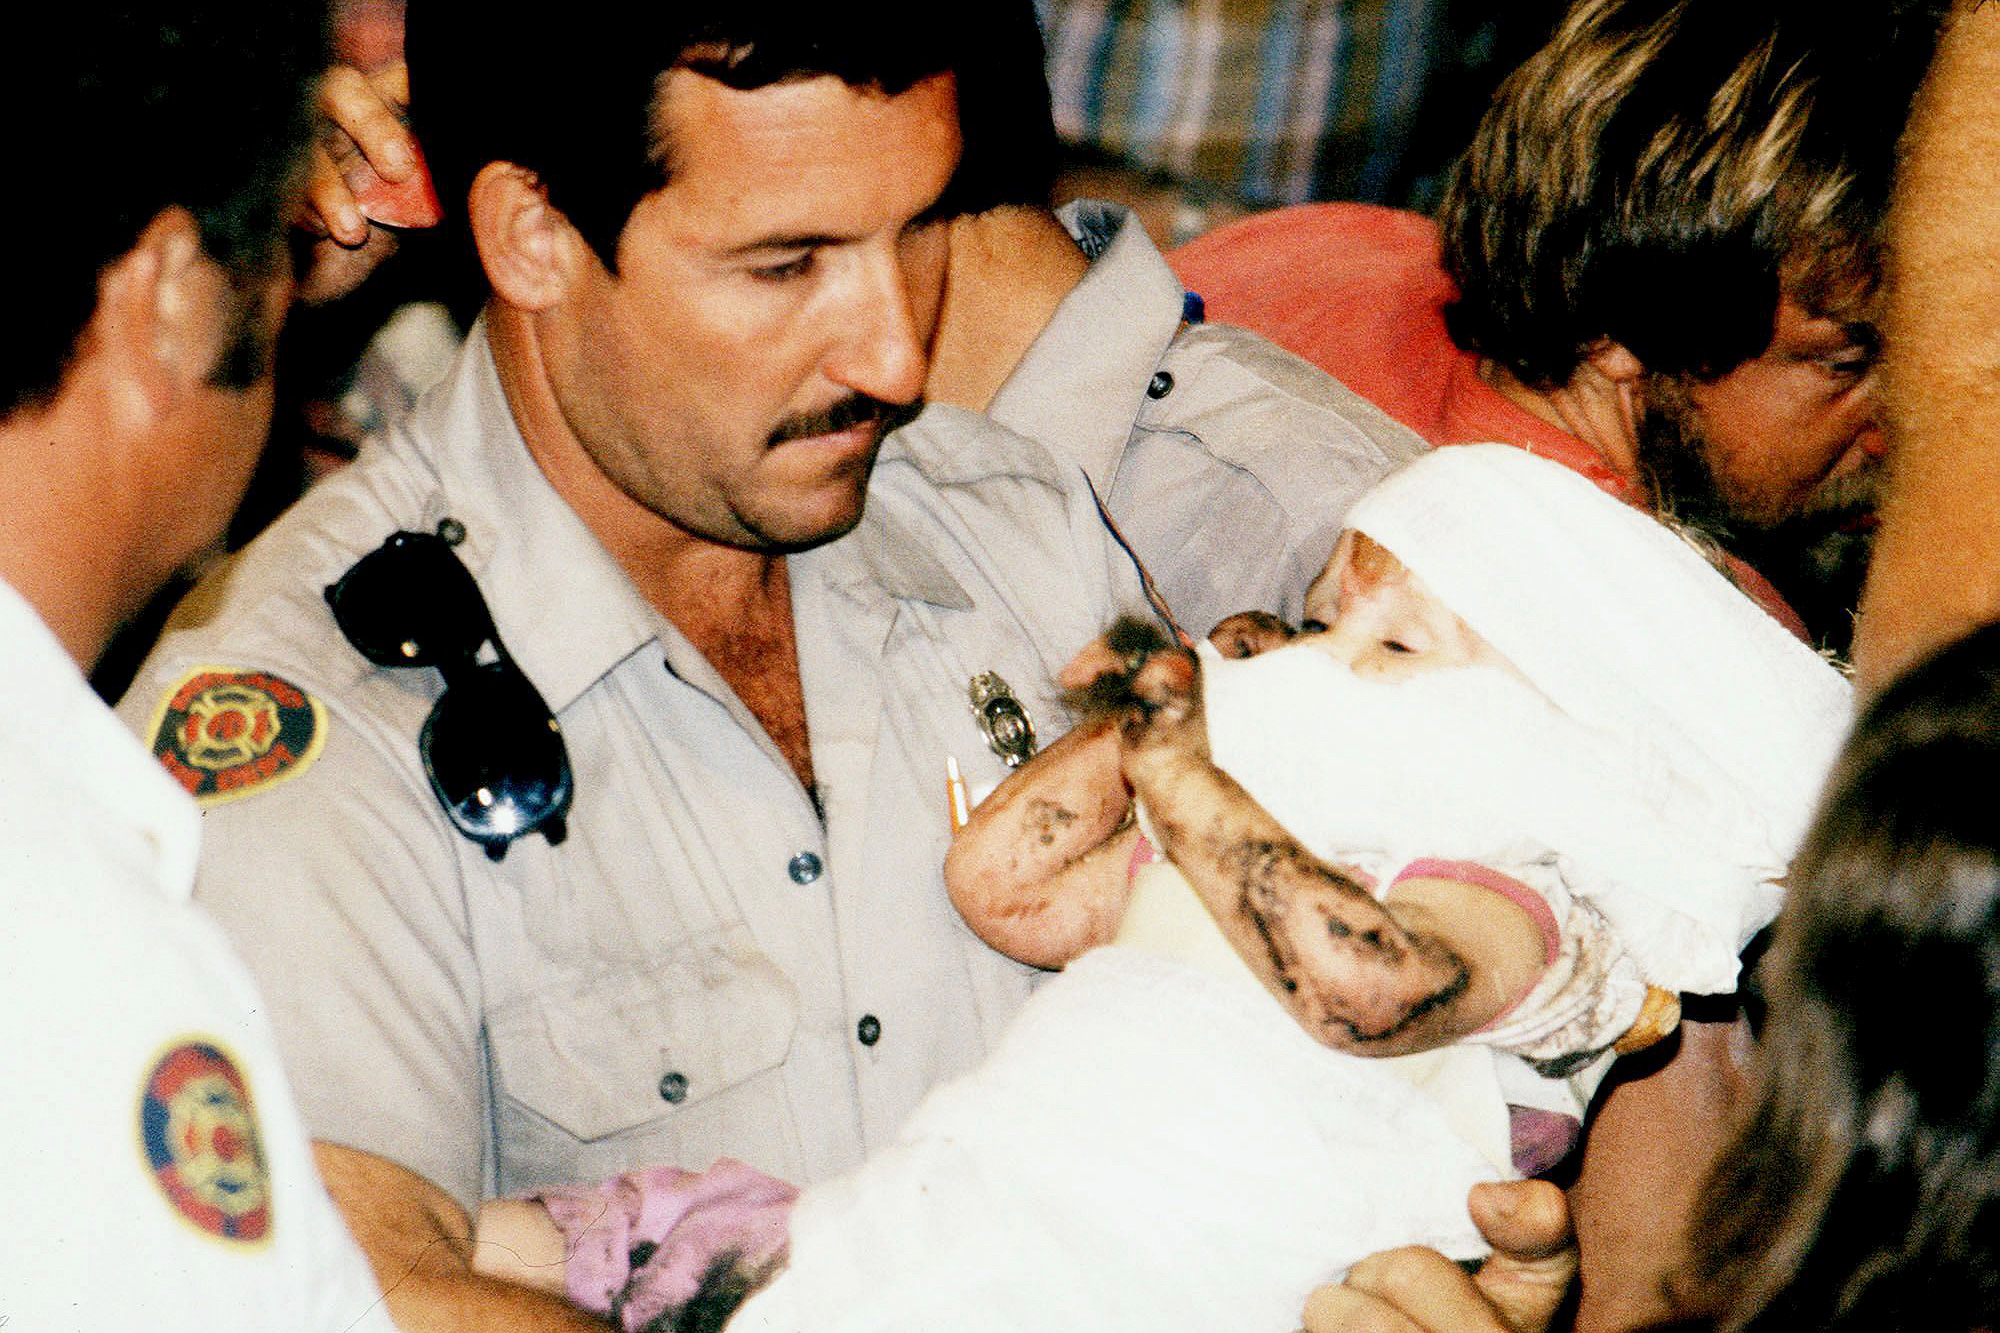 Her Rescue Captivated The World, 30 Years Later She's No Longer 'Baby' Jessica